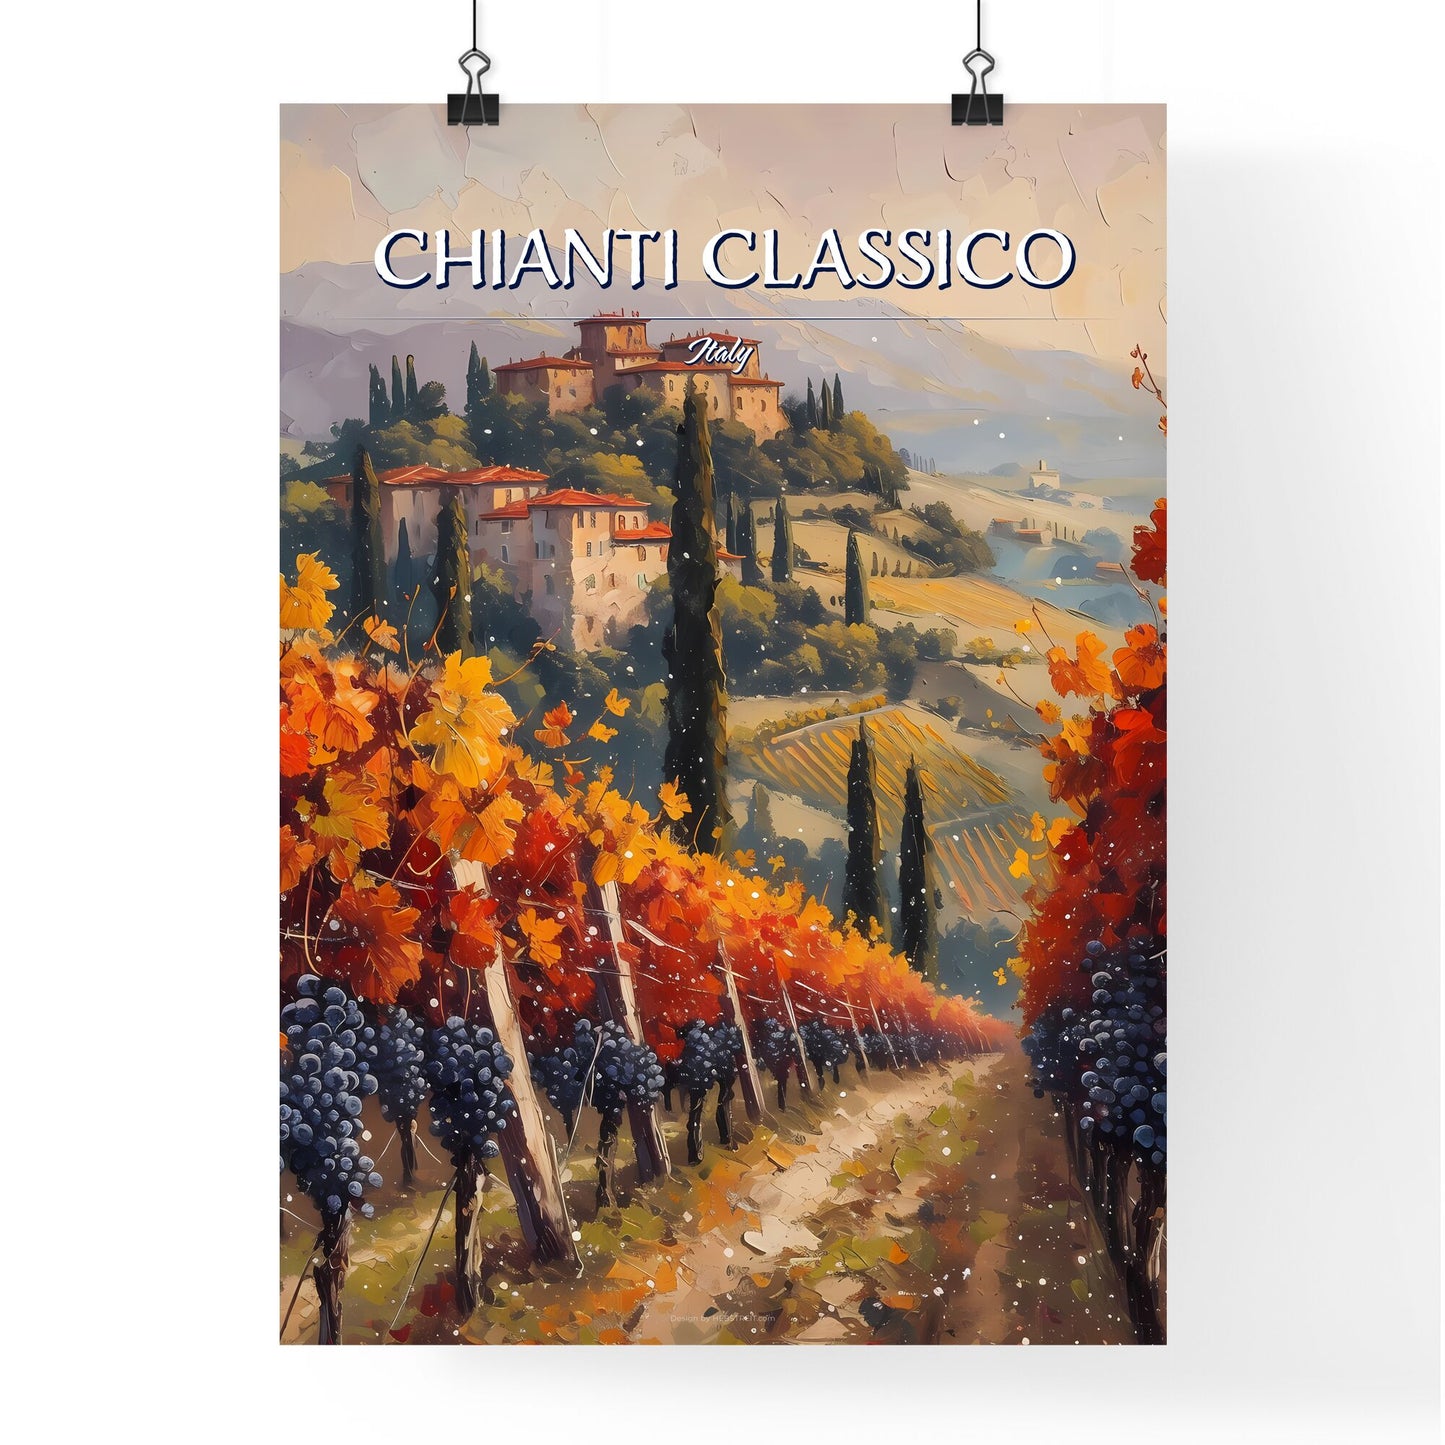 Chianti Classico, Italy - Art print of a painting of a vineyard with houses and trees Default Title